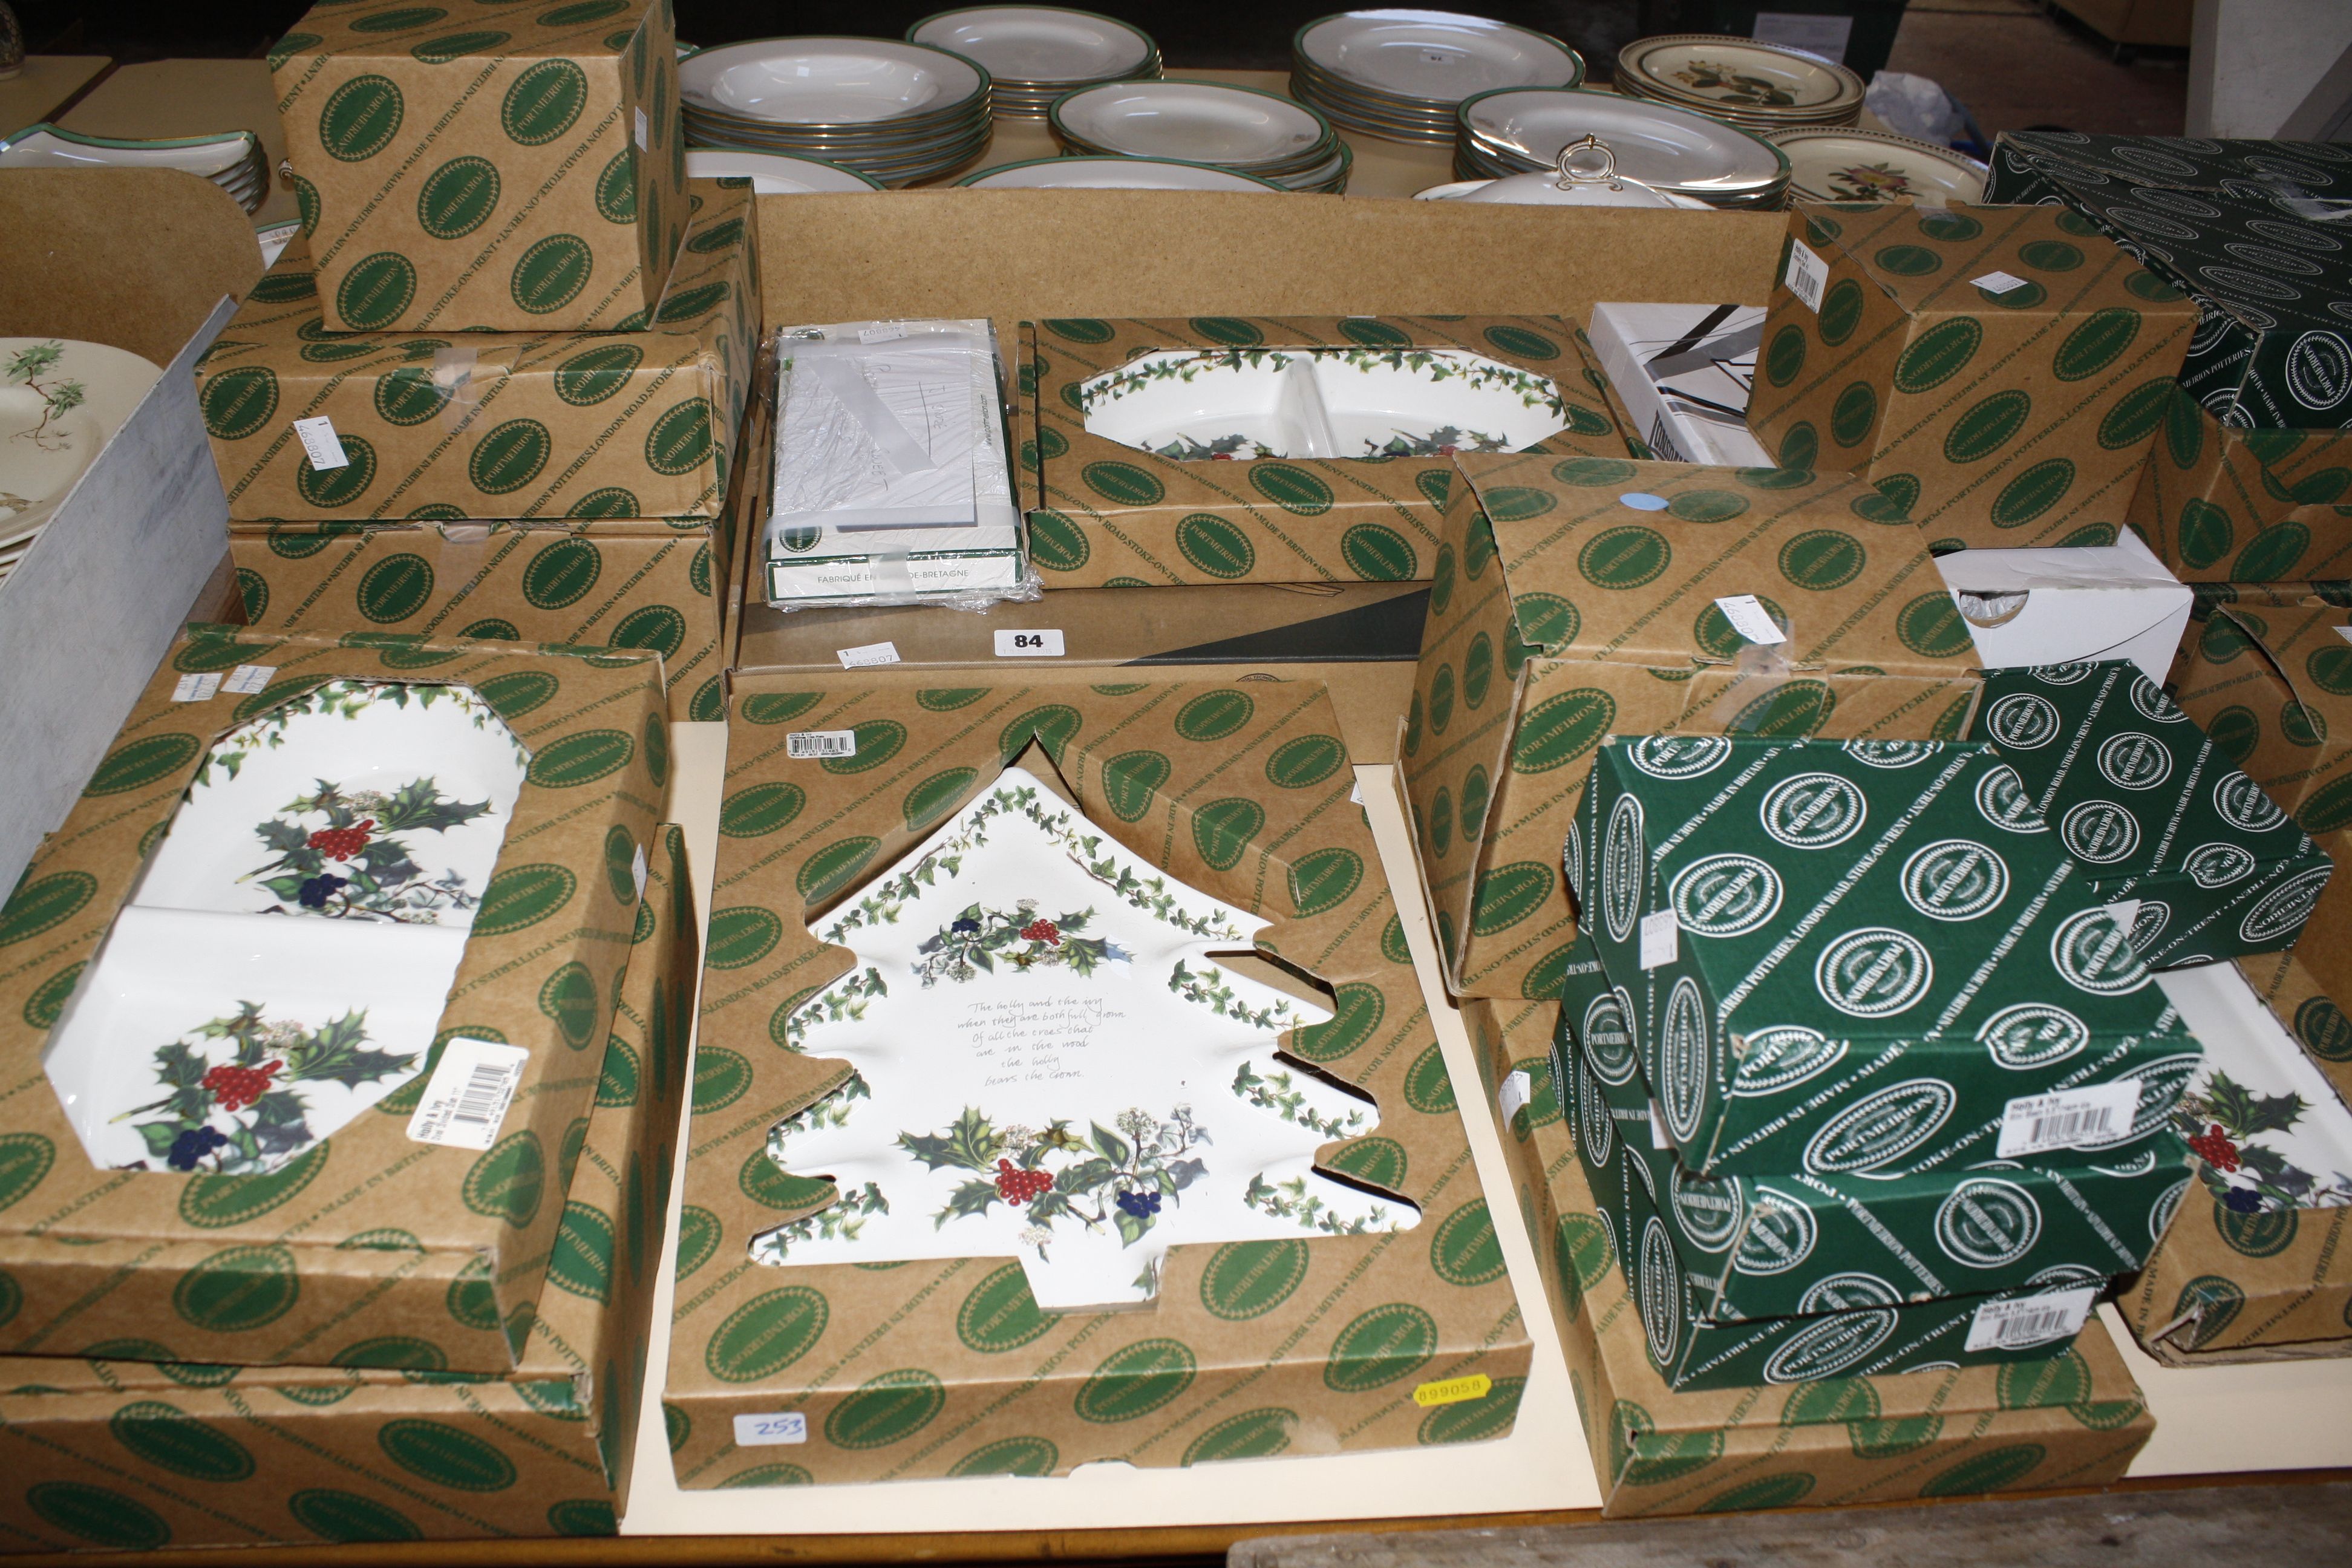 A quantity of Portmeirion 'Holly and Ivy' dinnerware and serving bowls, in original boxes.